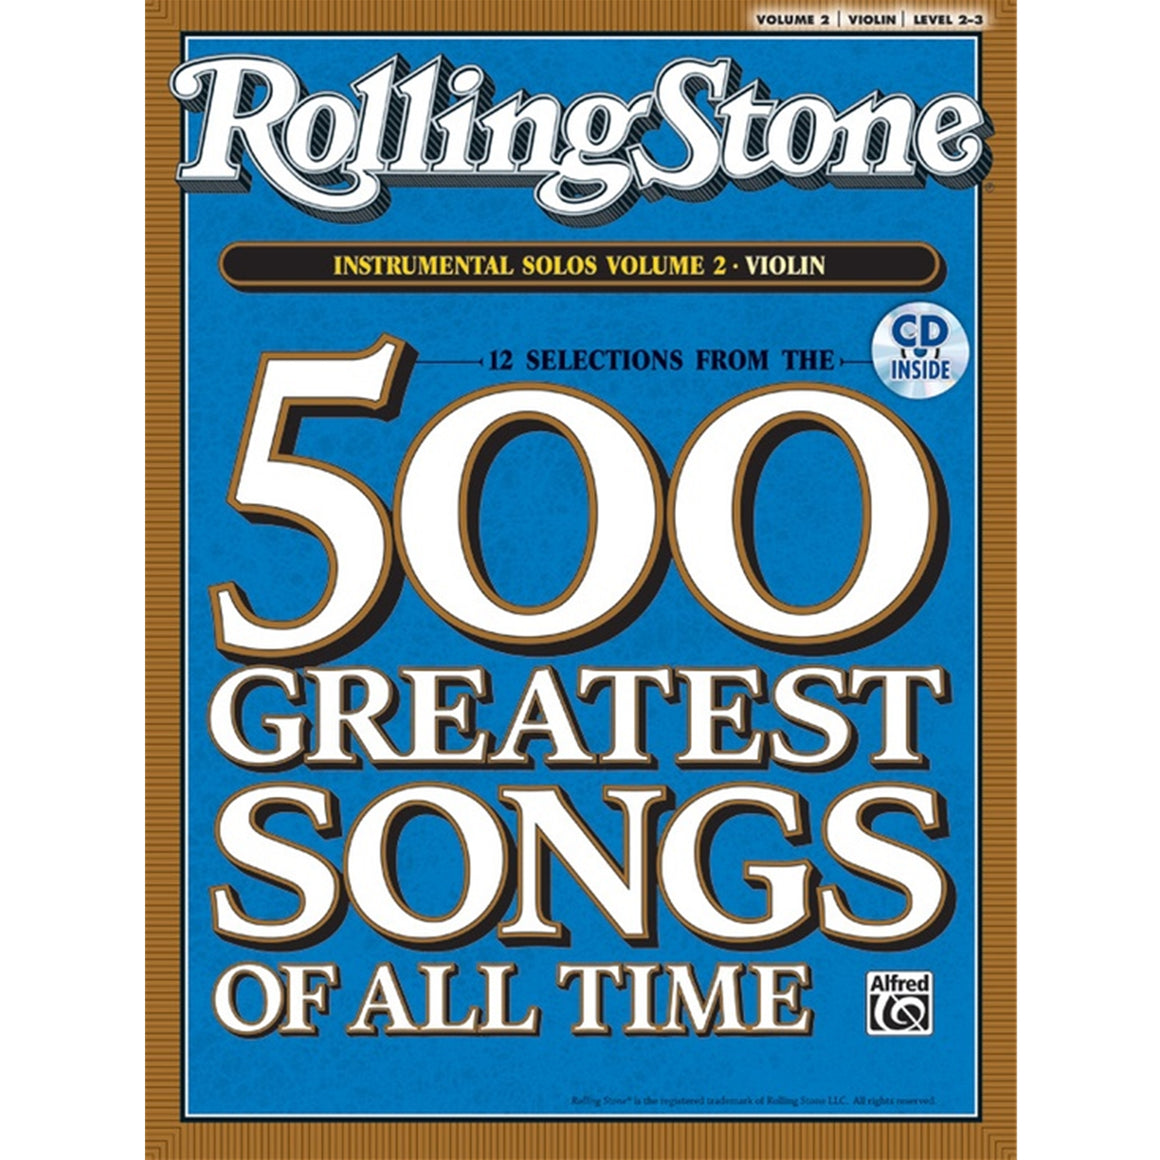 ALFRED 30866 Rolling Stone's 500 Greatest Songs of All Time: Instrumental Solos for Violins Volume 2